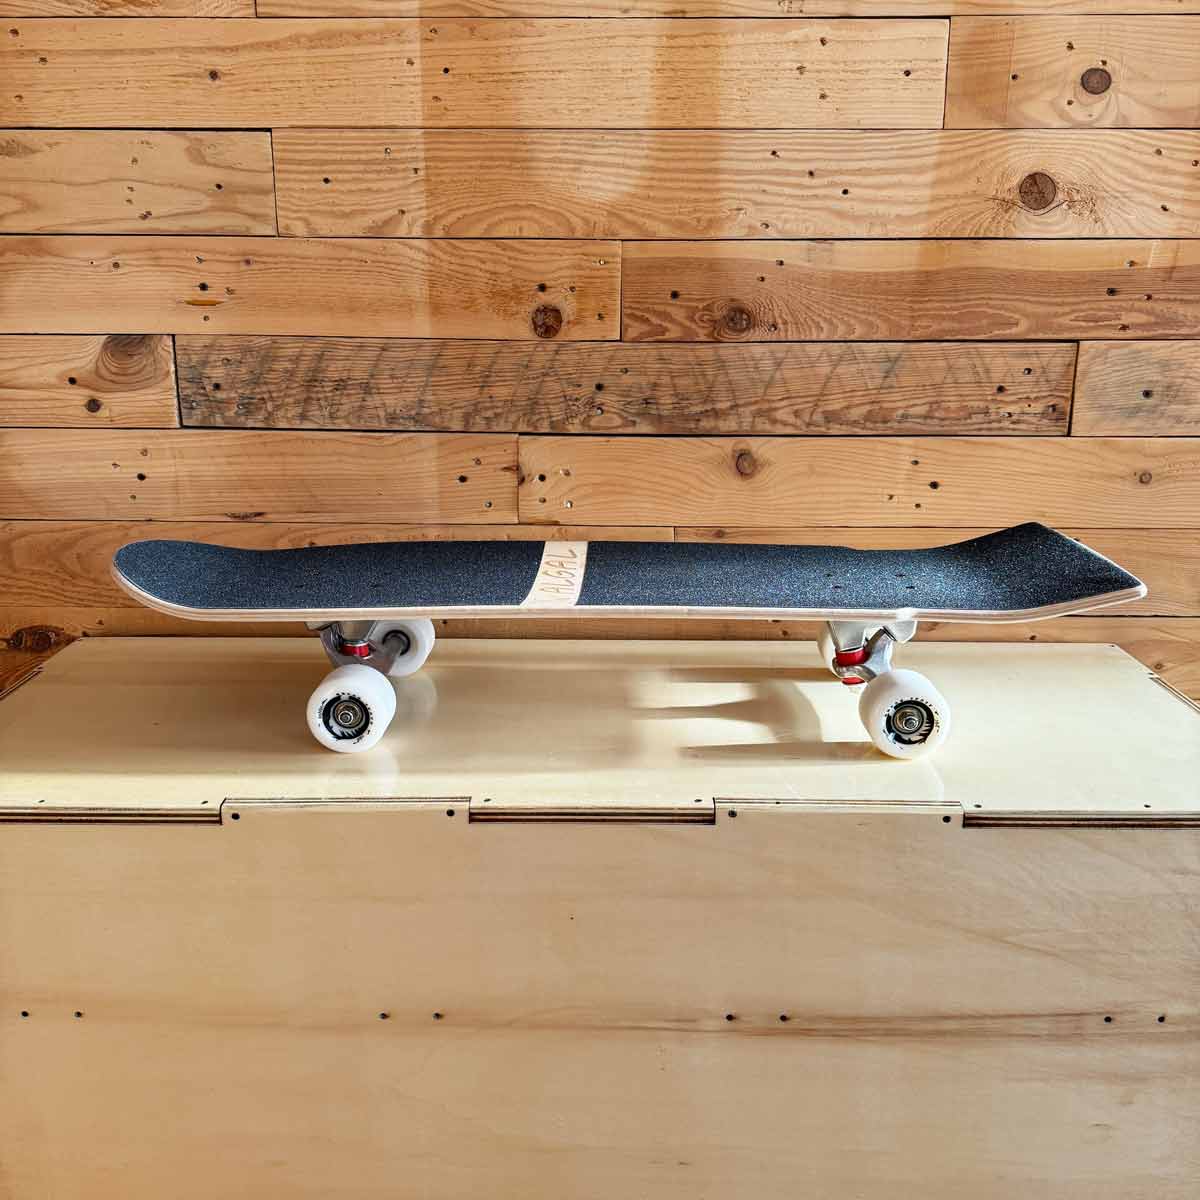 Surfskate Quiver 2024 by Algal Board